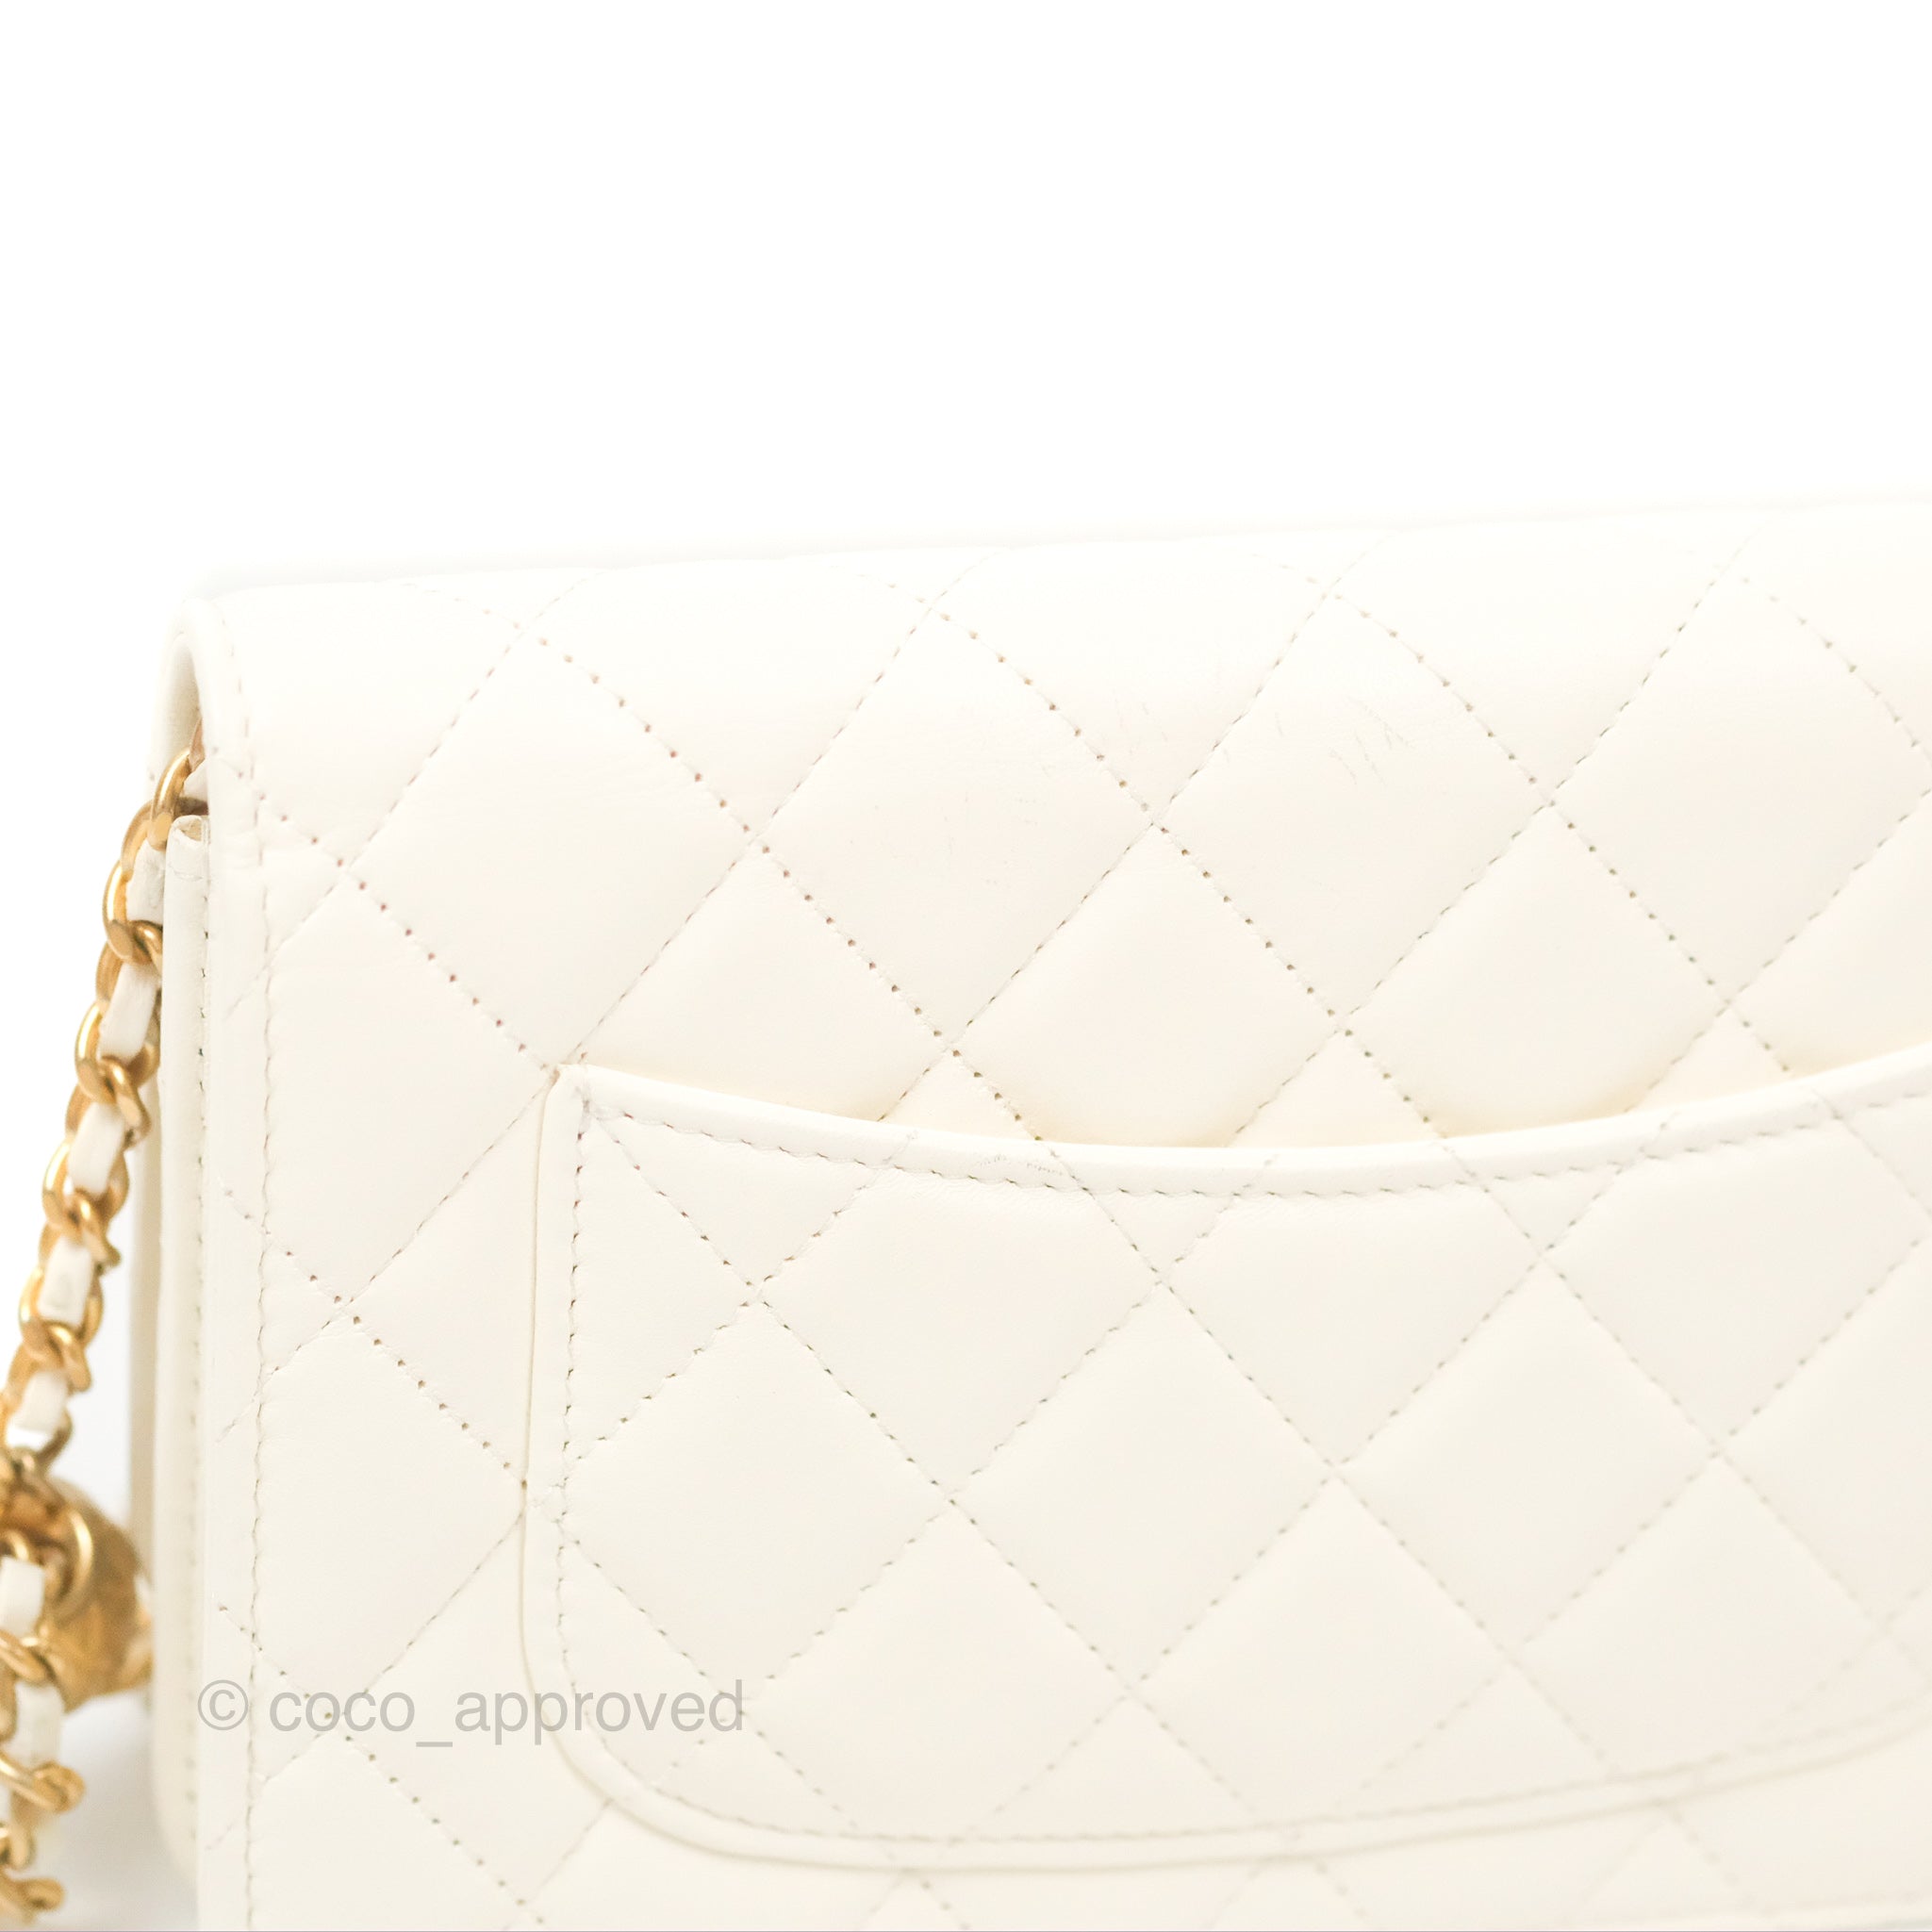 Chanel Quilted Pearl Crush Wallet on Chain WOC Light Grey Lambskin